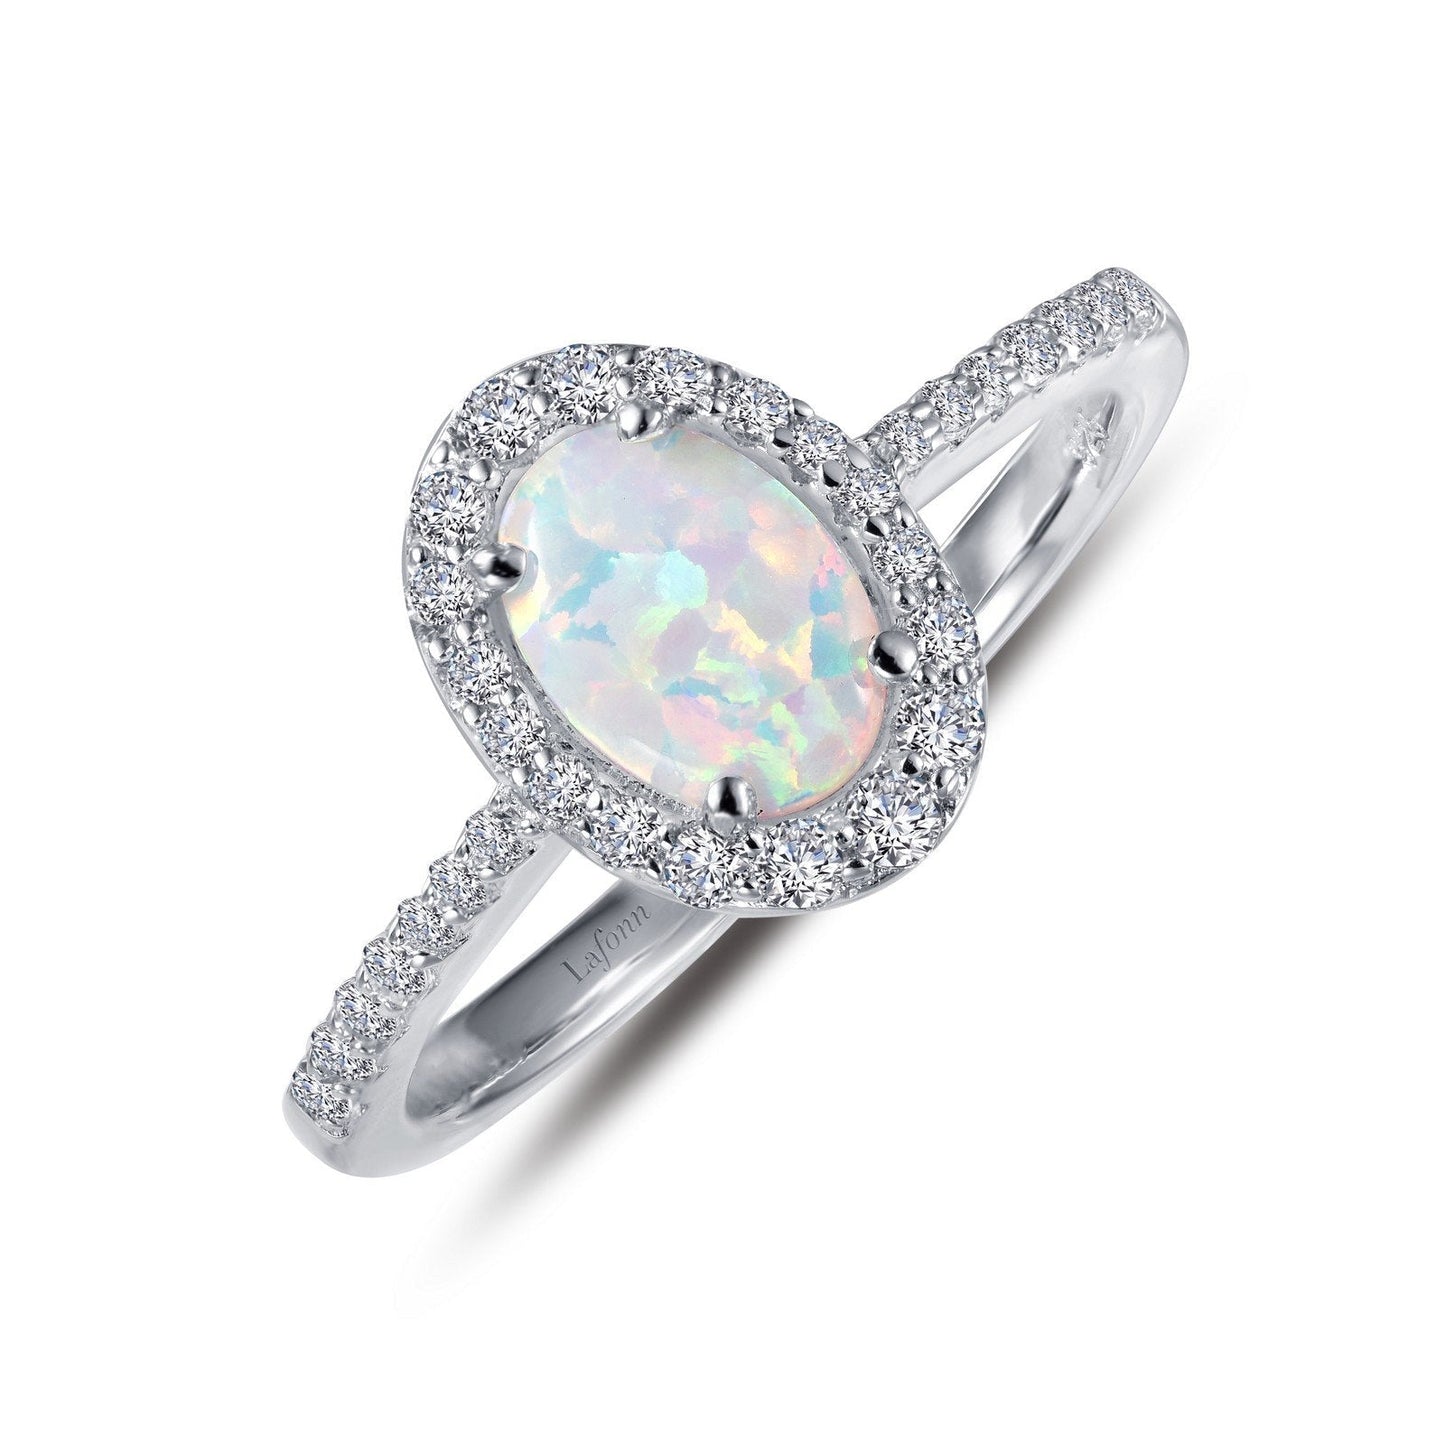 Lafonn Halo Engagement Ring Opal RINGS Size 6 Platinum 1.92 CTS Width approx. 10.2mm